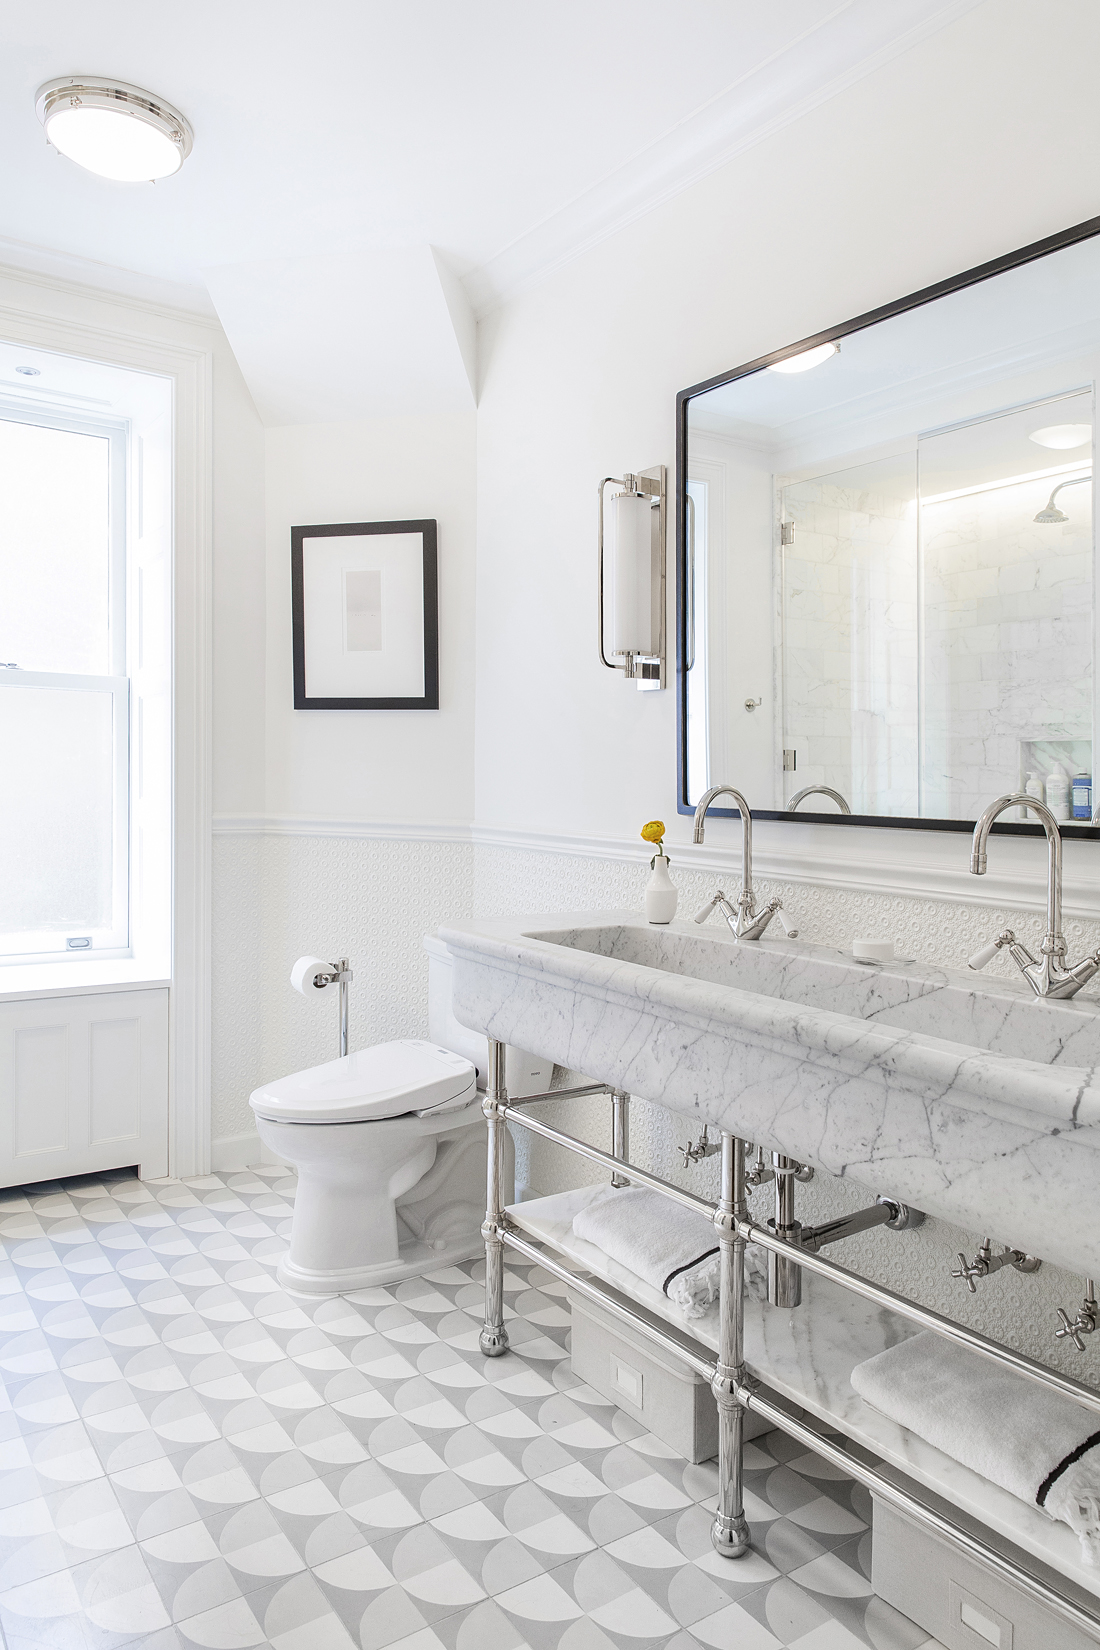 Timeless White Bathroom by Reunion Goods & Services and Fogarty Finger Architecture